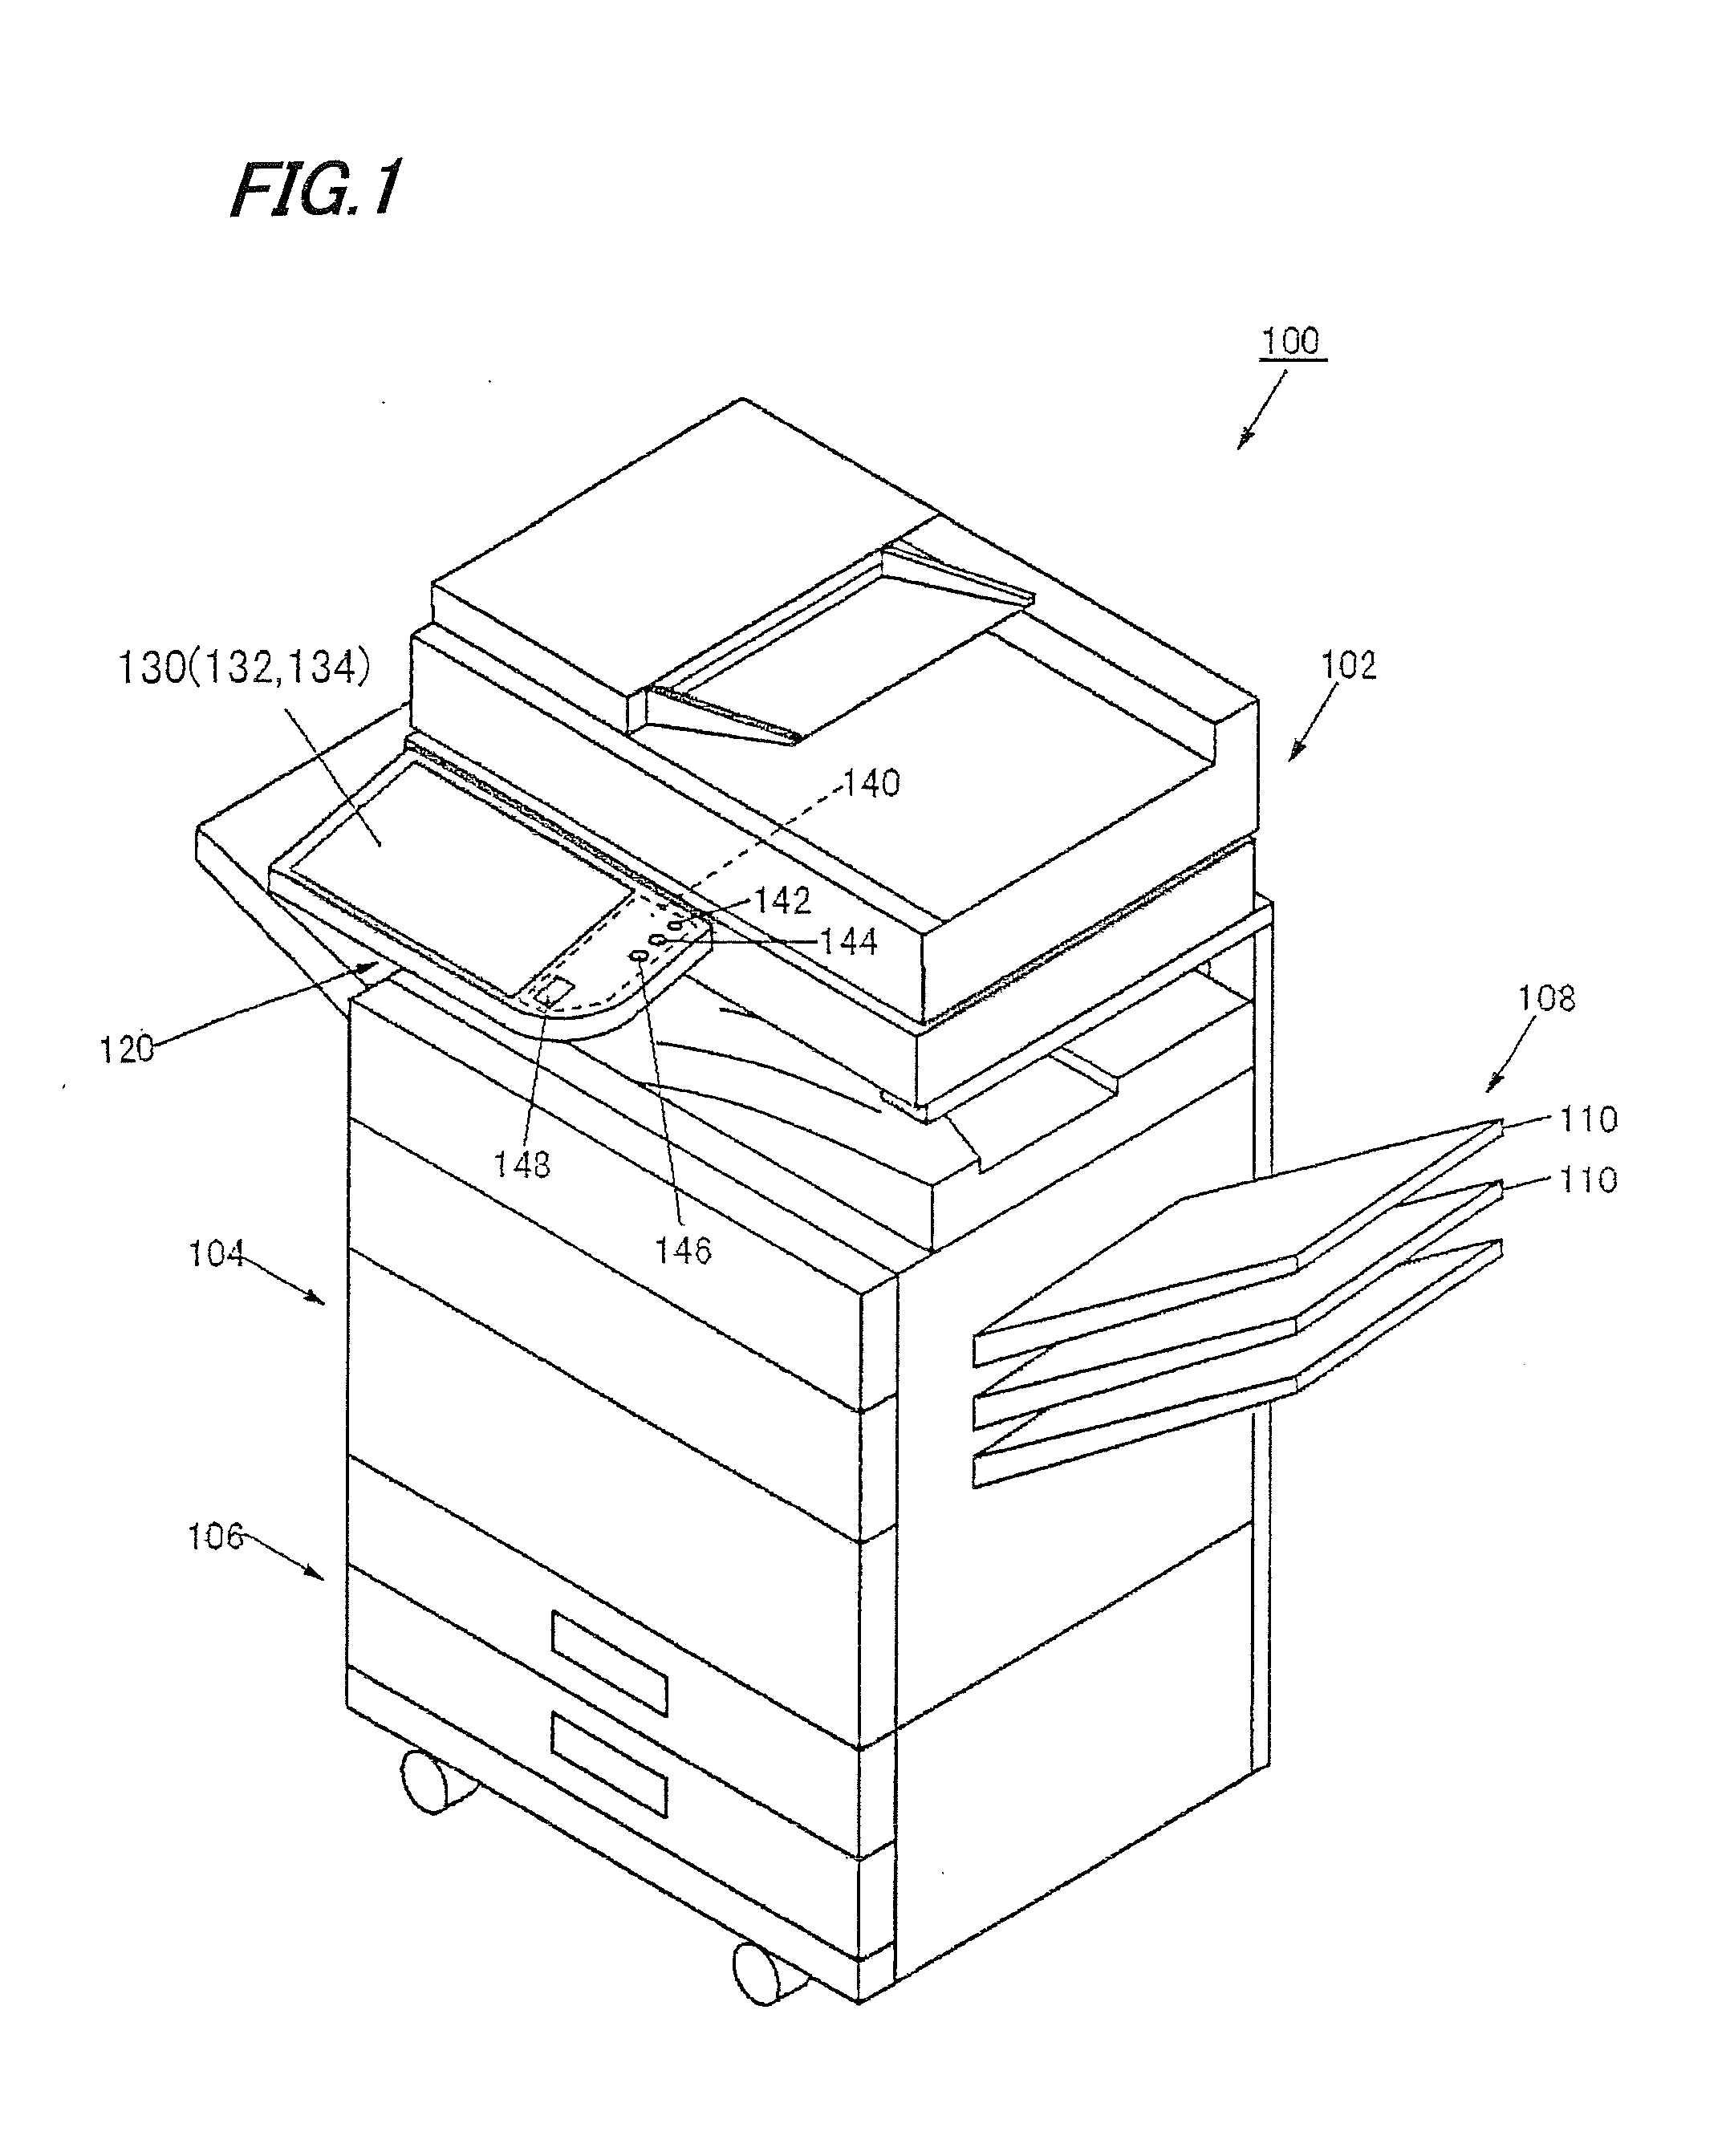 Image display control device and image forming apparatus including the same